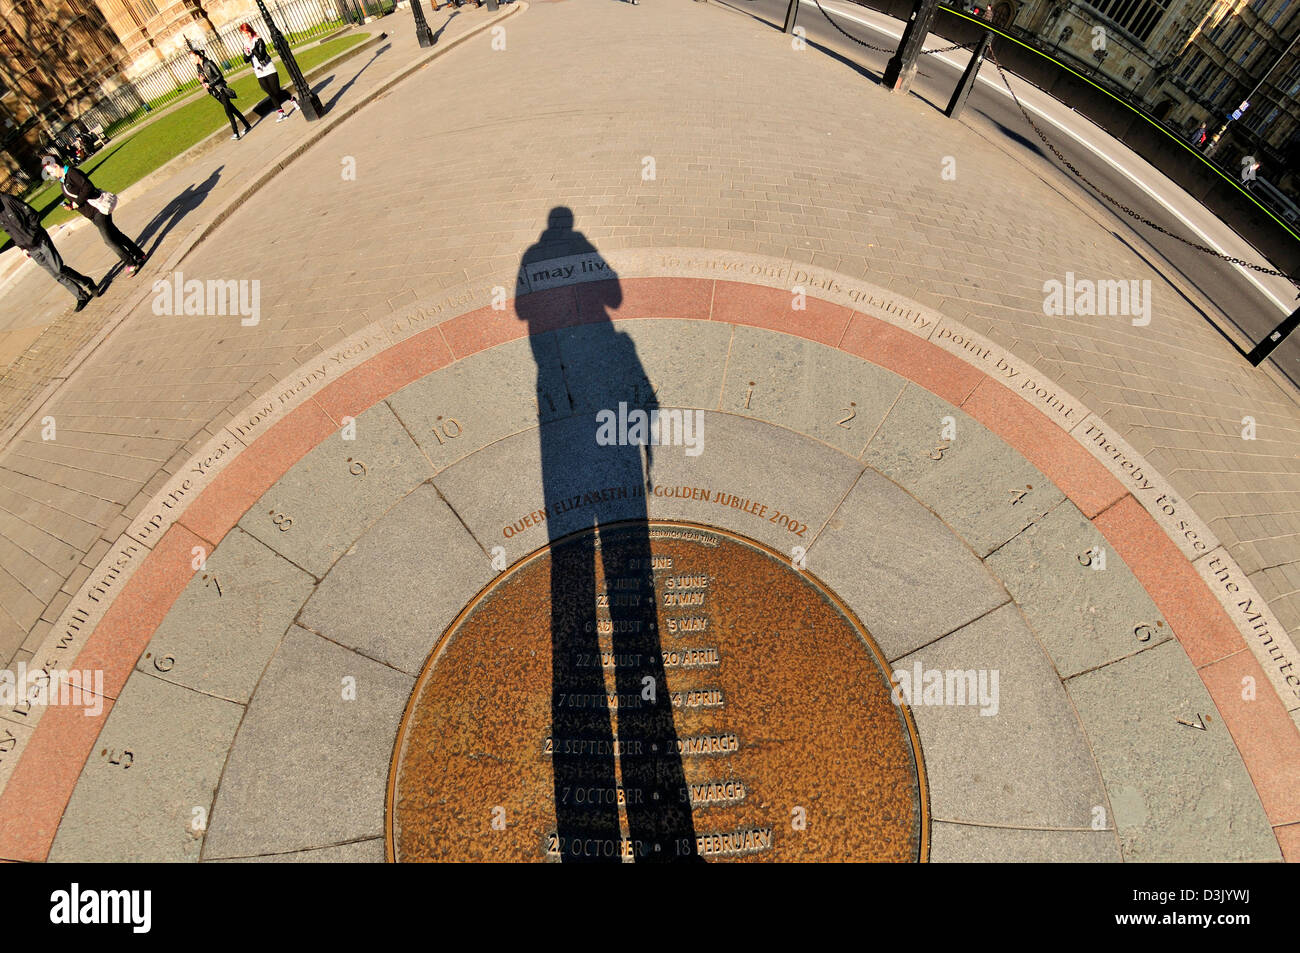 London, England, UK. Analemmatic sundial in Westminster, commemorating the queen's Golden Jubilee, 2002. Stock Photo